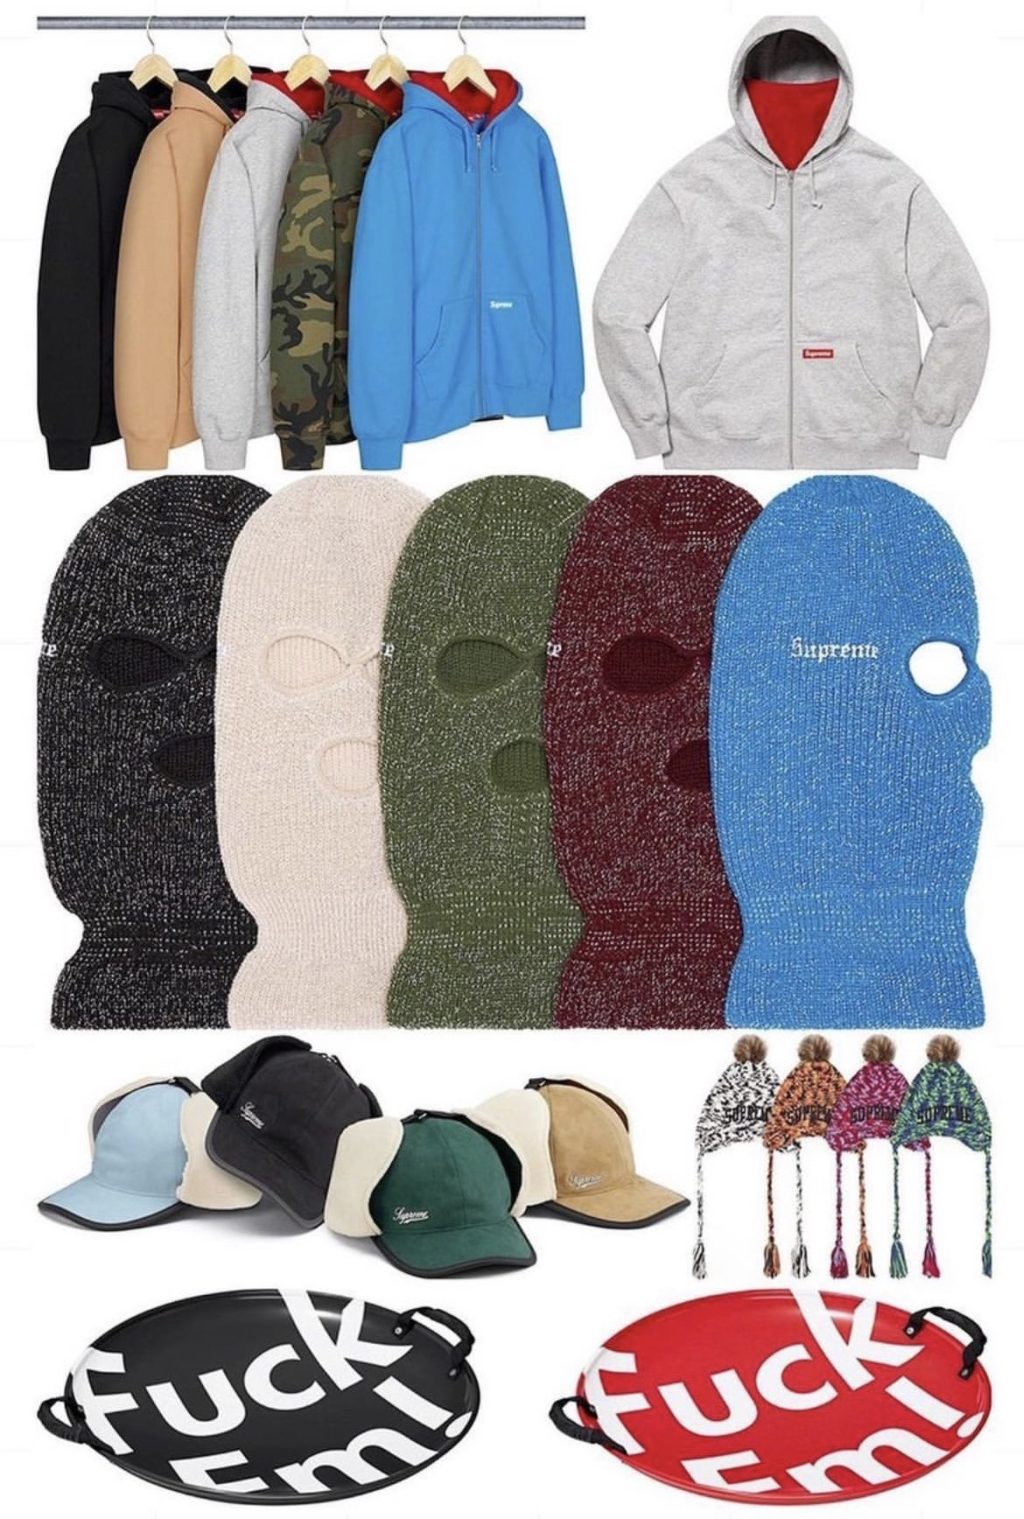 supreme-online-store-20230107-week19-22aw-22fw-release-items